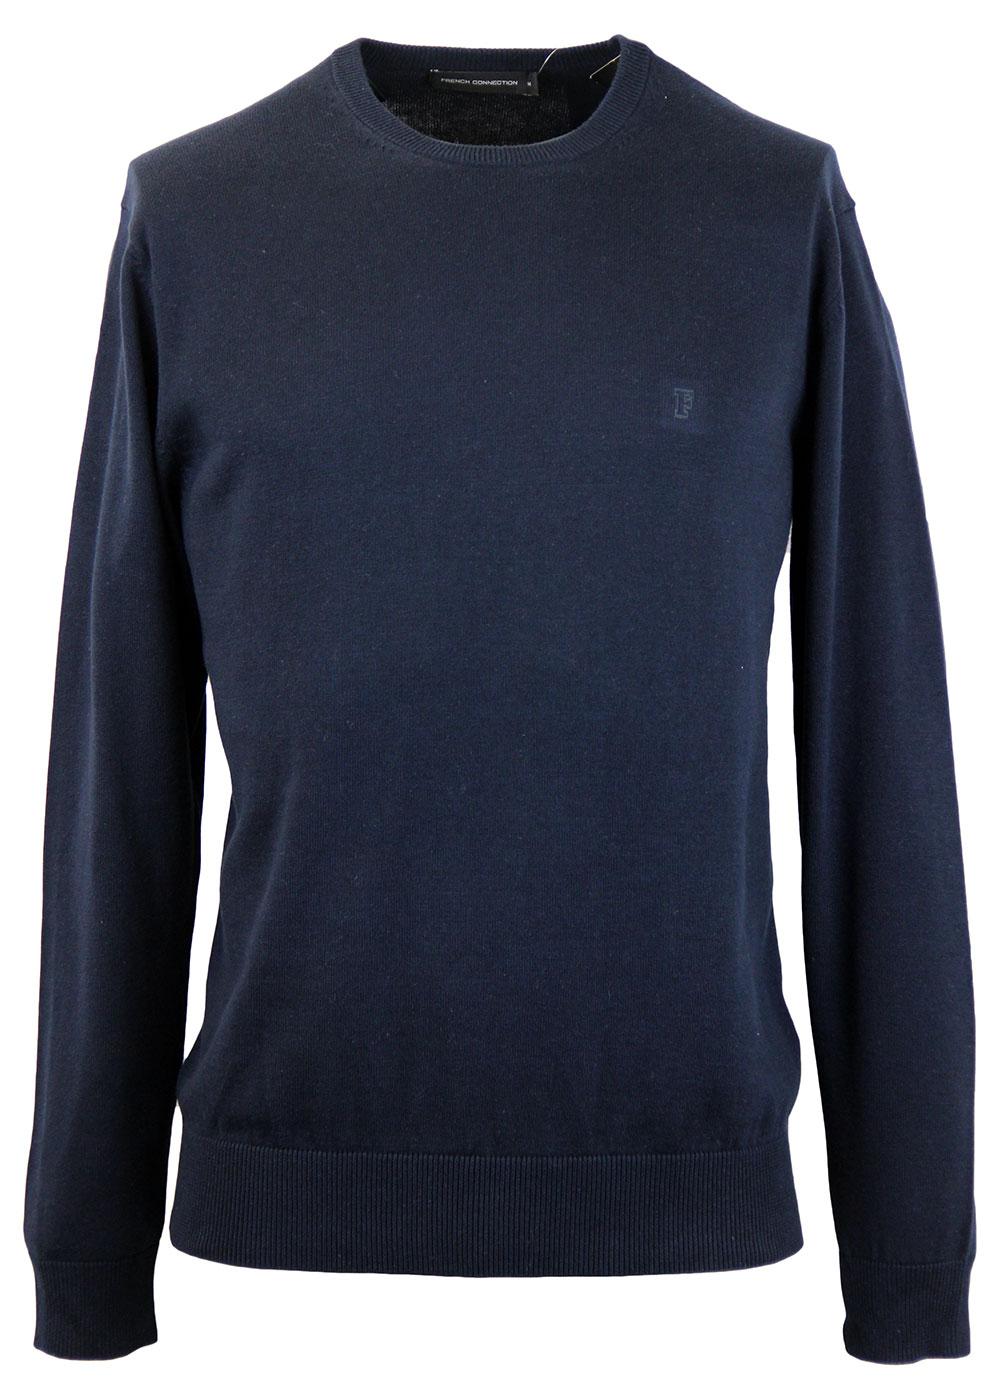 FRENCH CONNECTION Auderly Retro Crew Neck Jumper